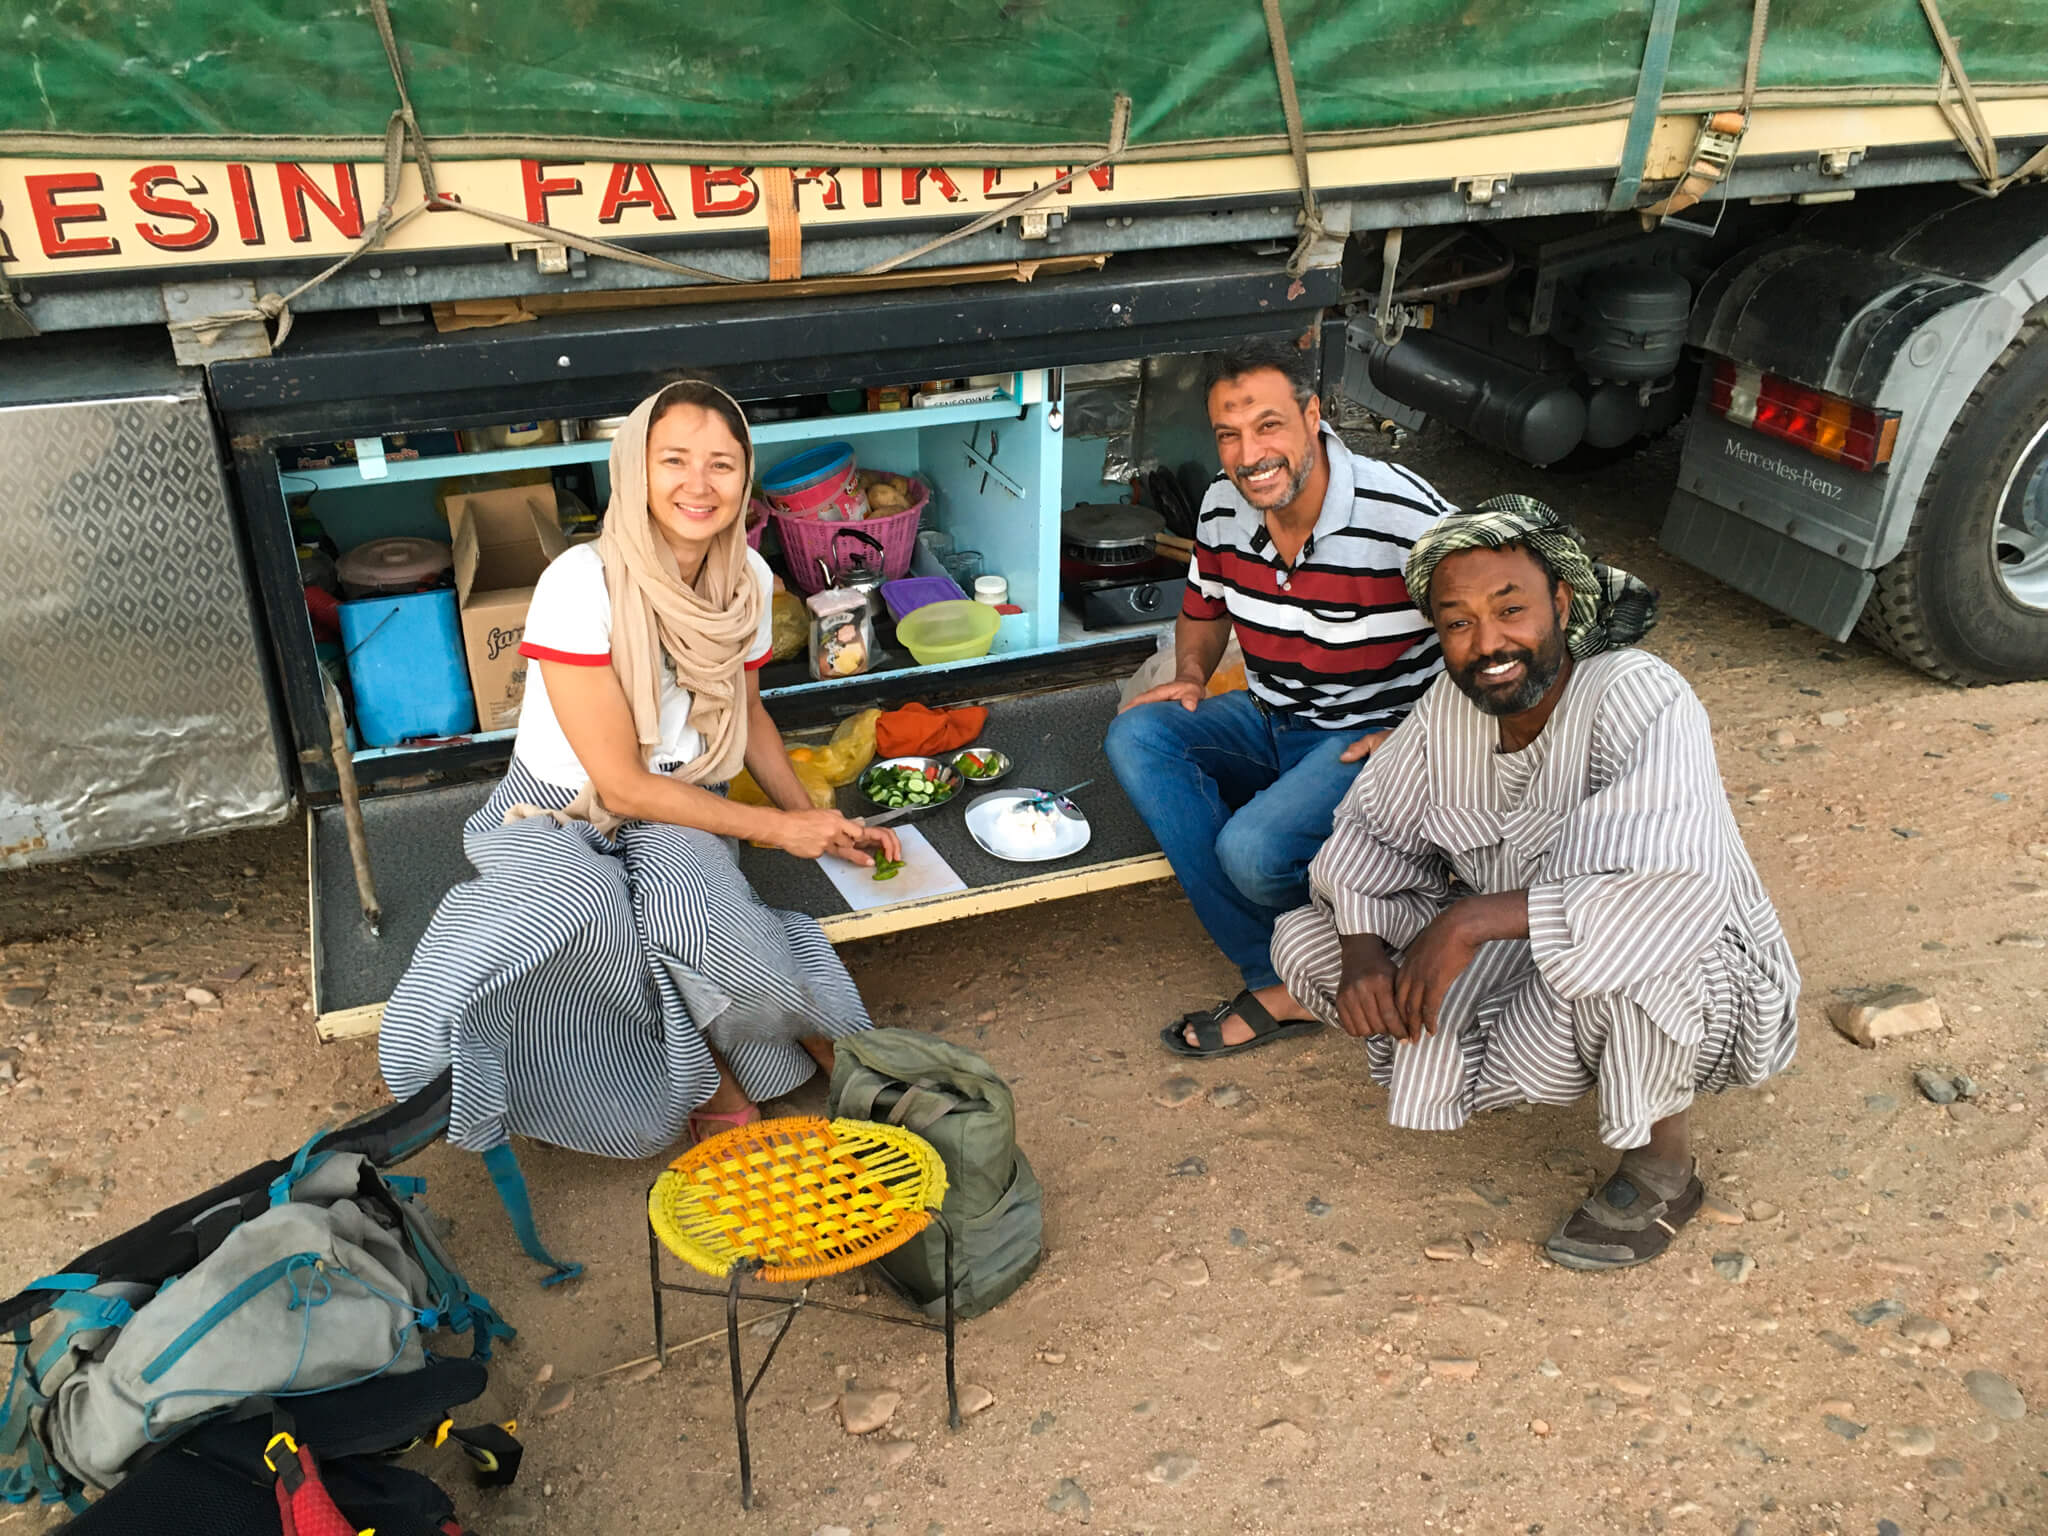 Anna, our truck driver and a Nubian guy who hitchhiked with us eating iftar by the truck.